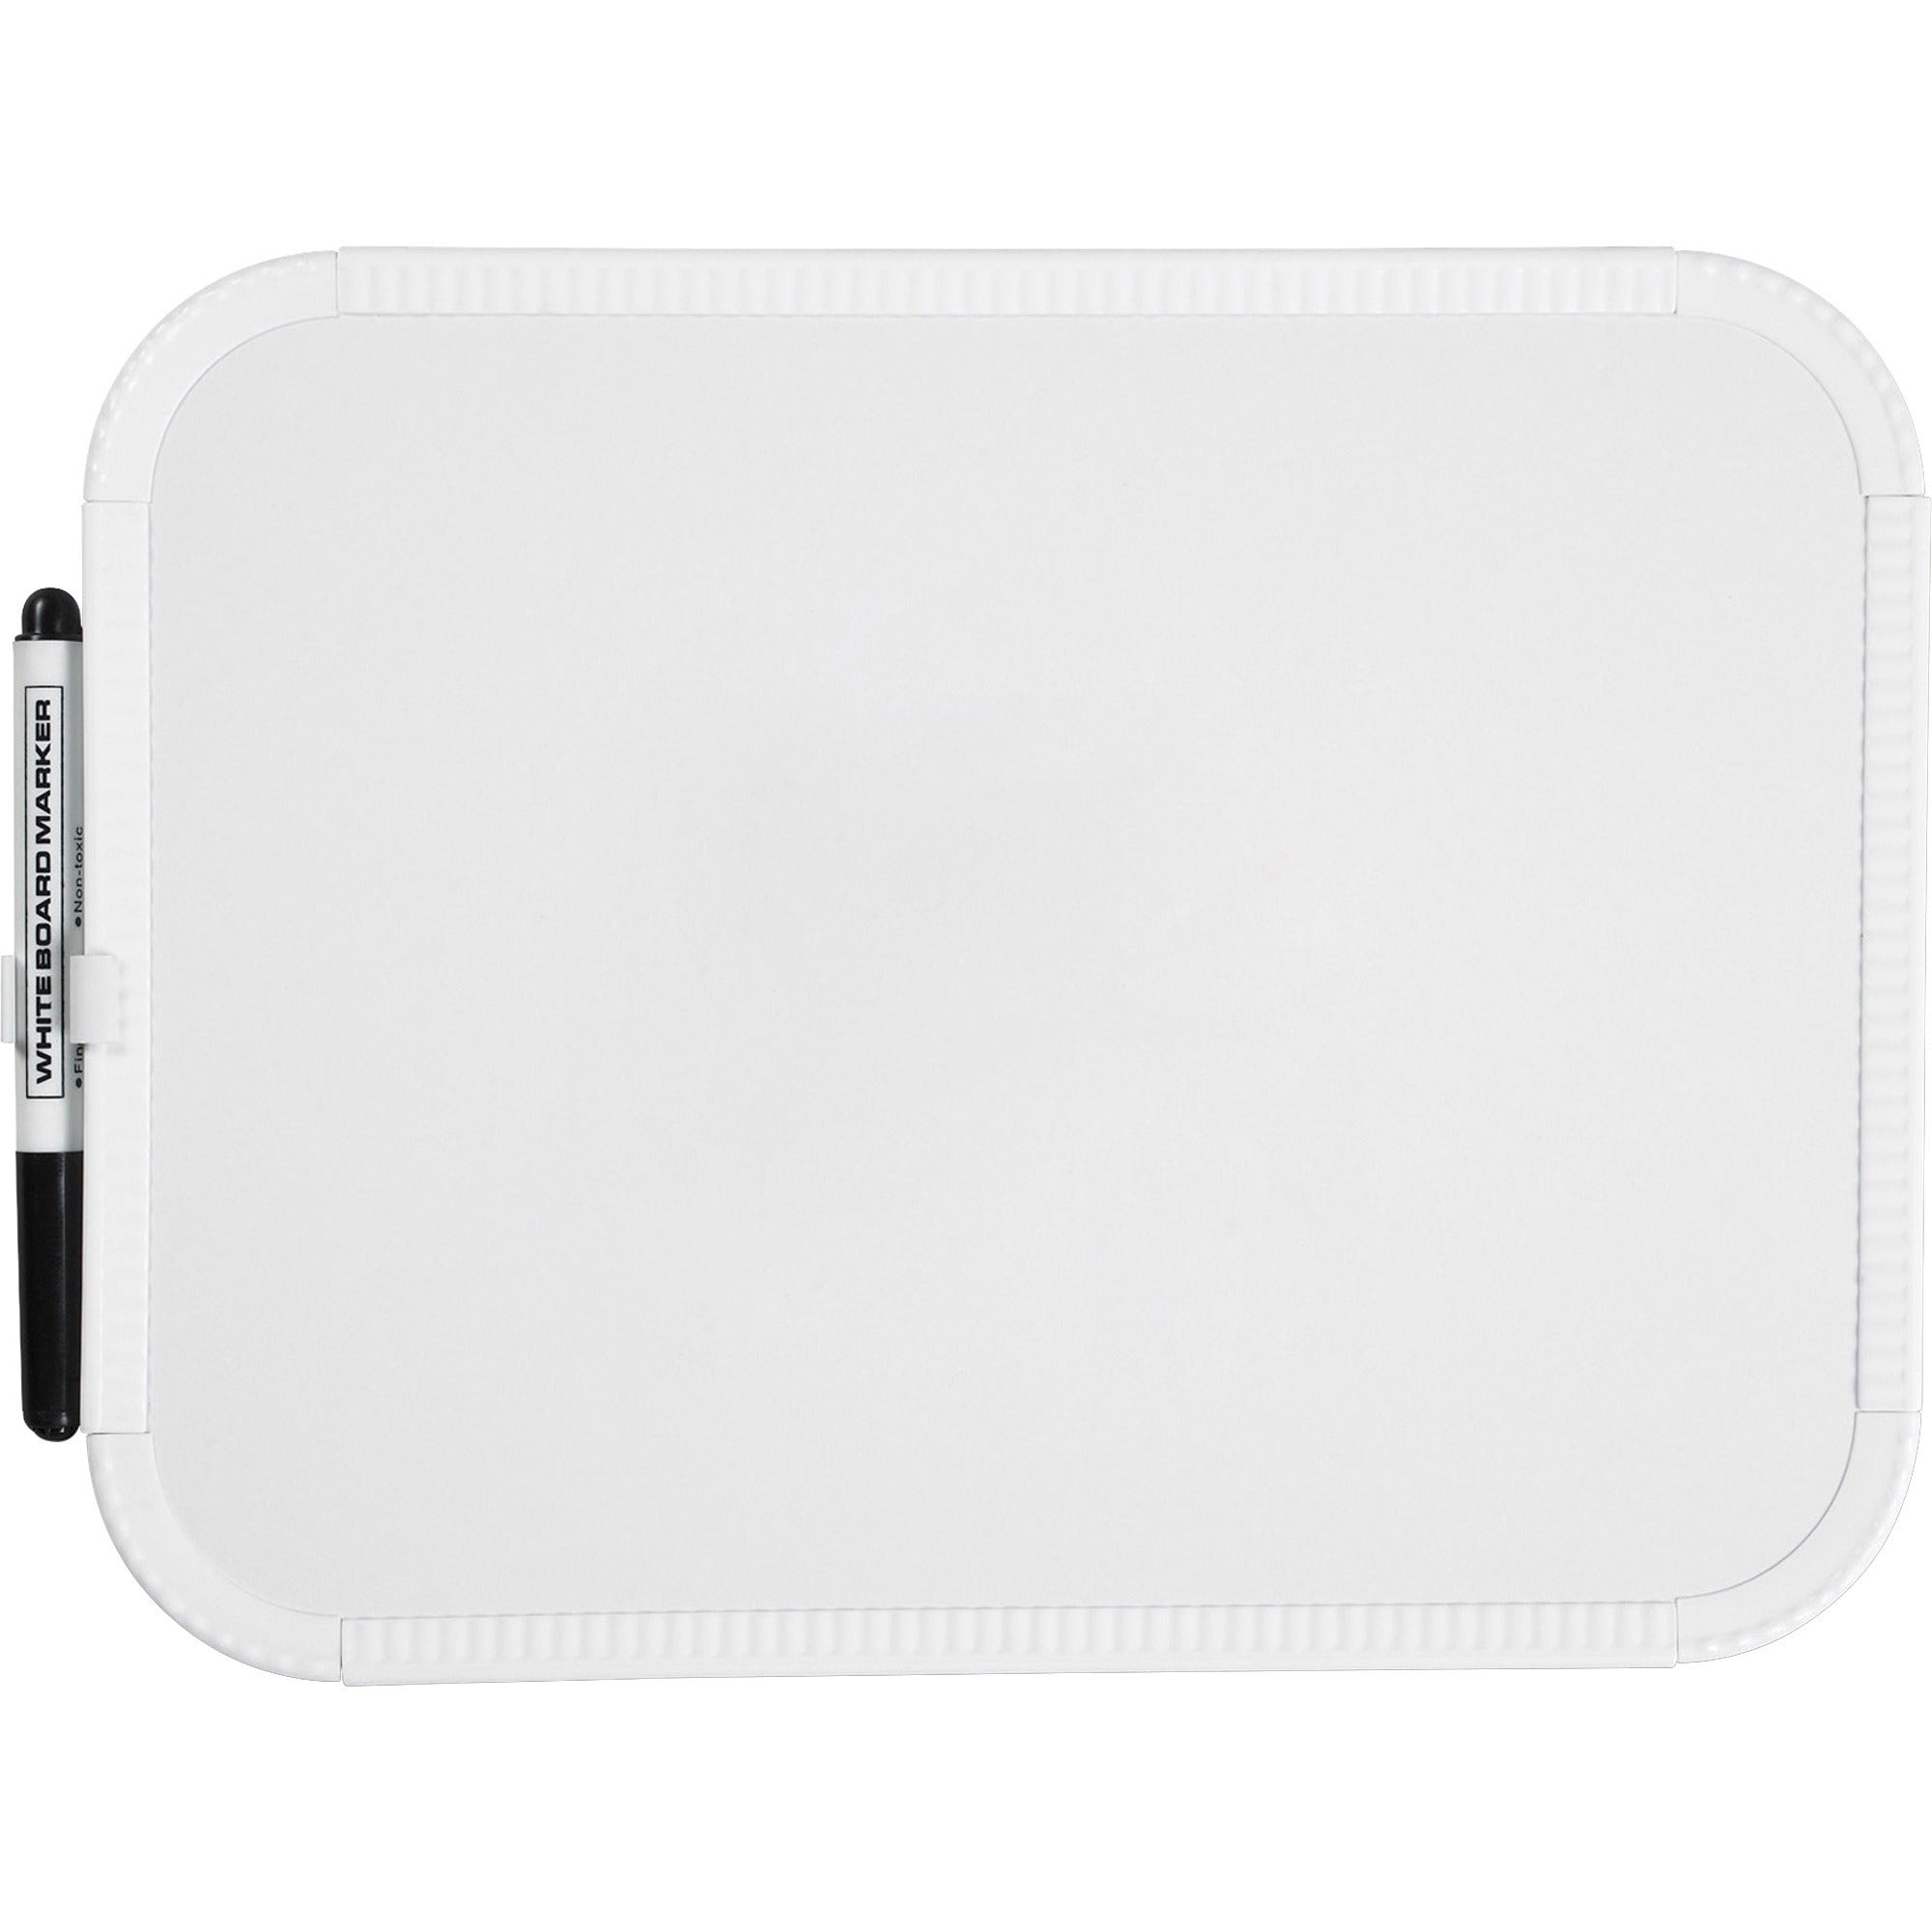 lorell-personal-whiteboards-11-09-ft-width-x-85-07-ft-height-white-melamine-surface-white-plastic-frame-rectangle-6-bundle_llr75620bd - 2